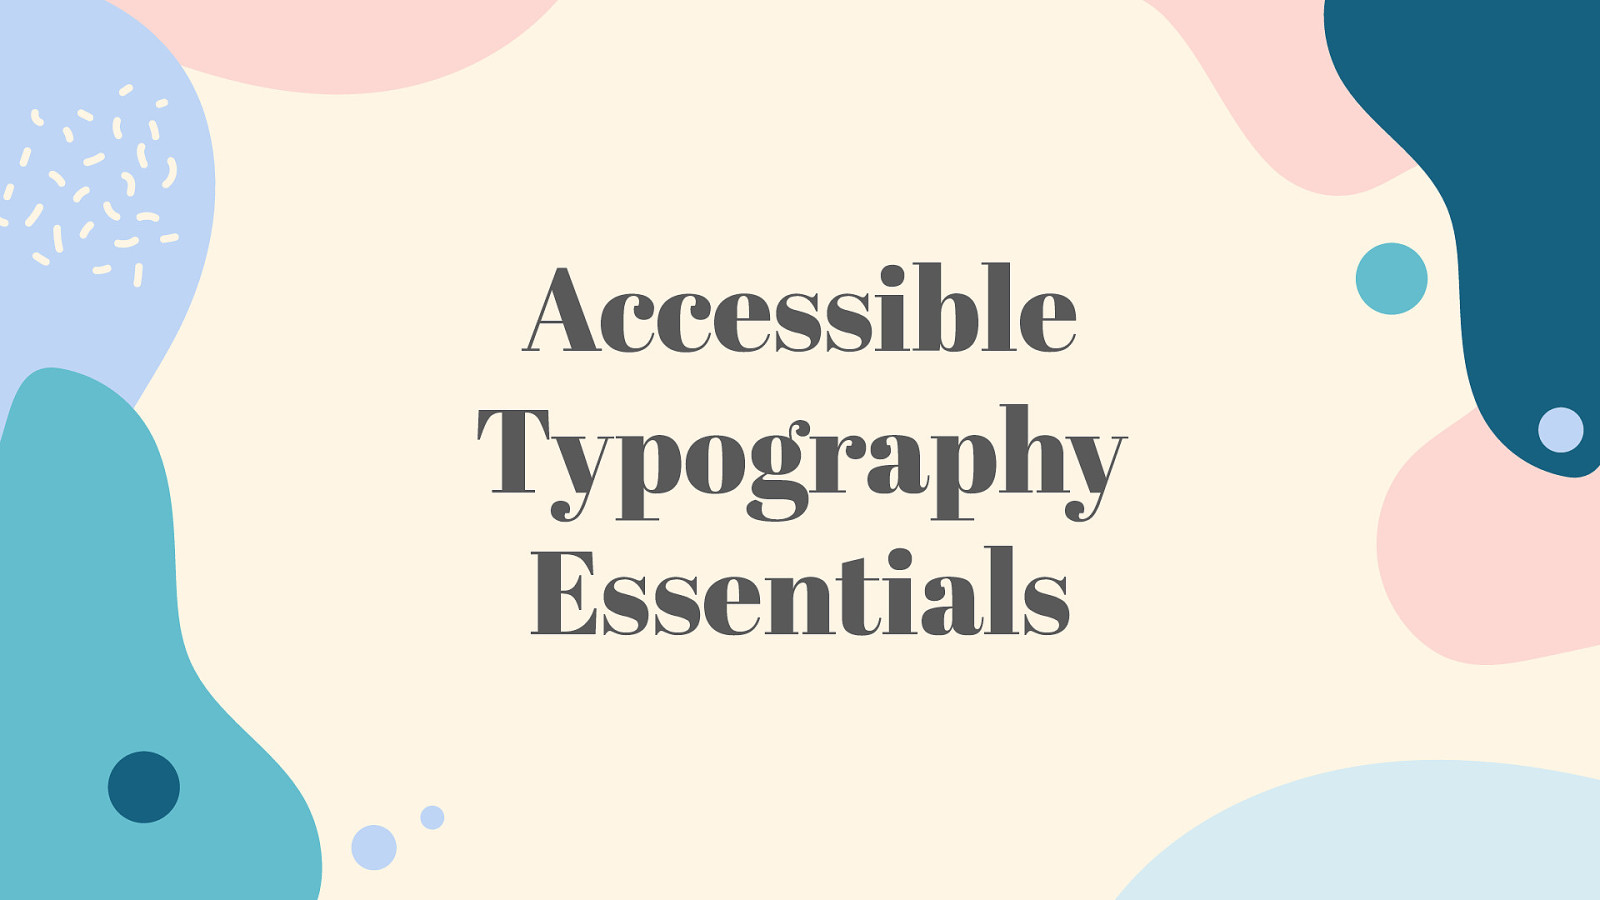 Accessible Typography Essentials by Carie Fisher